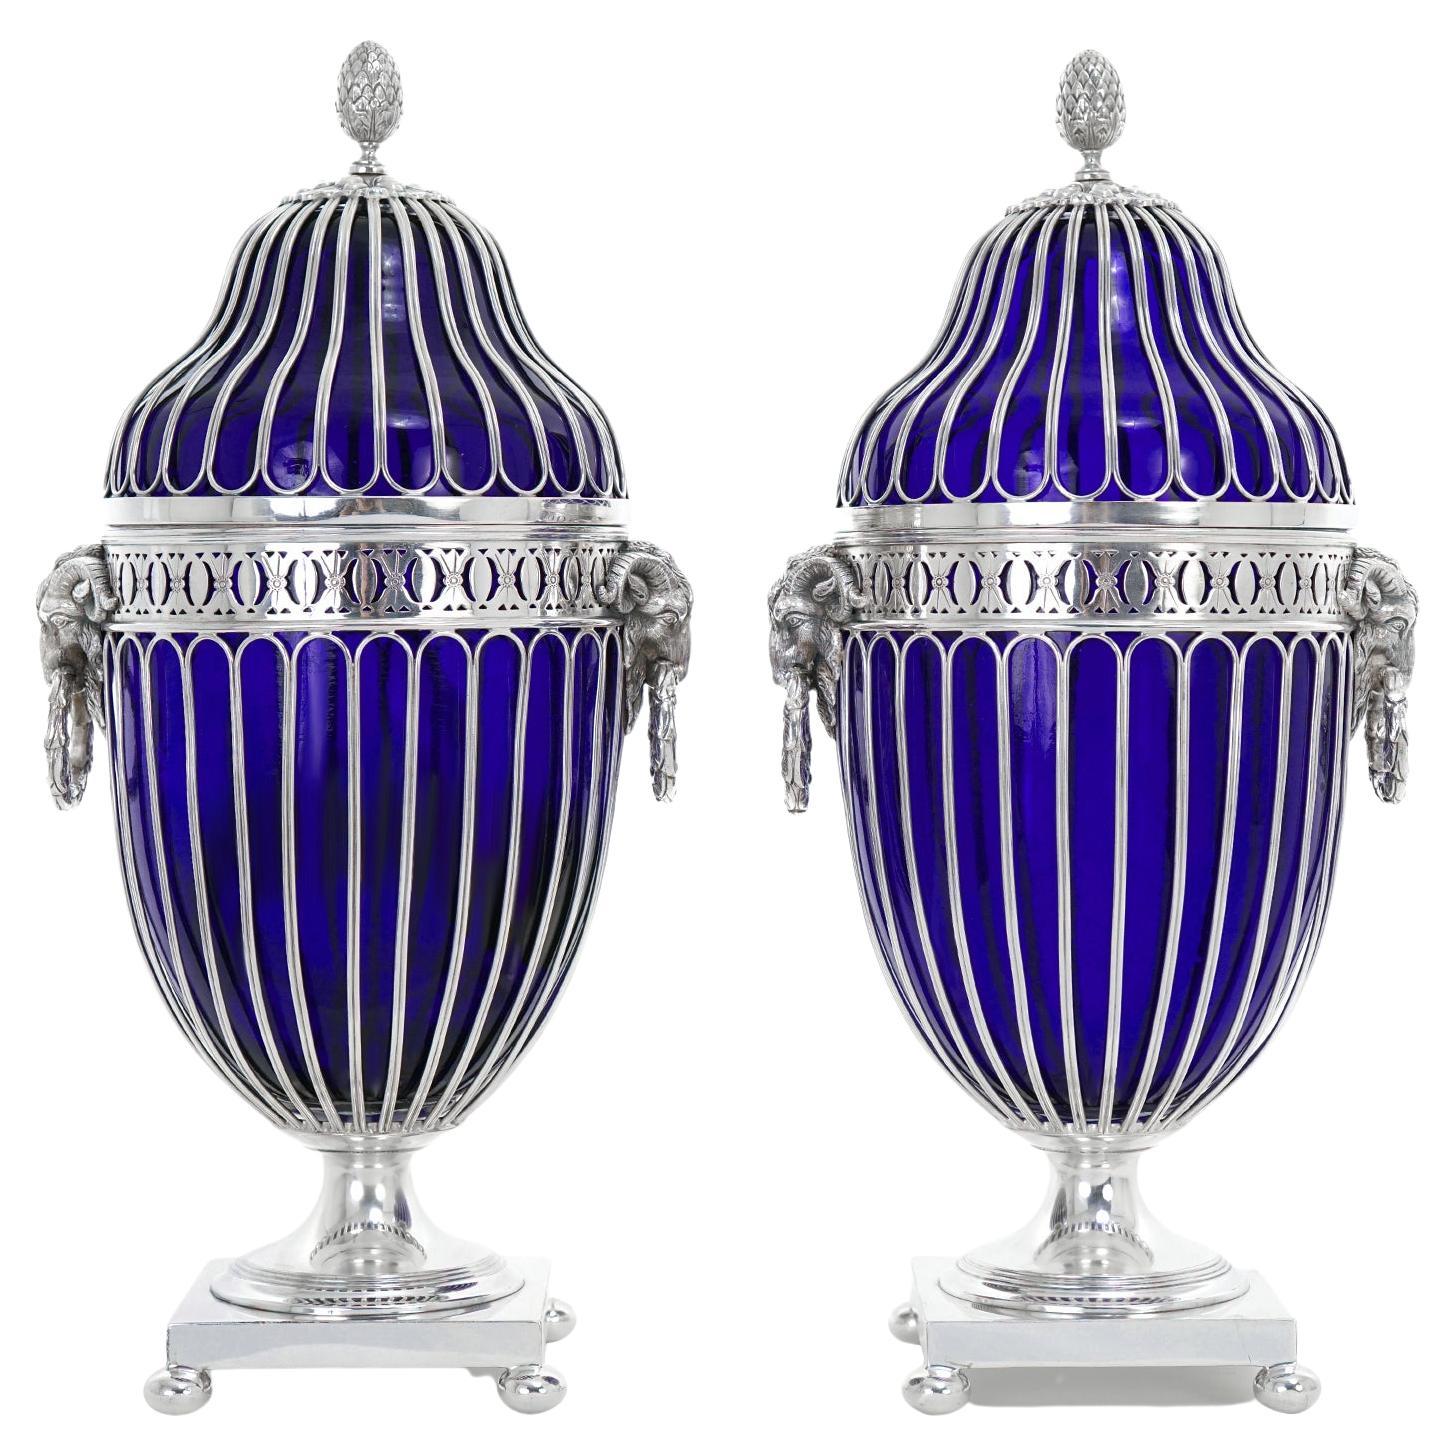 Pair of English Silver-Plate Chestnut Urns, C 1920s